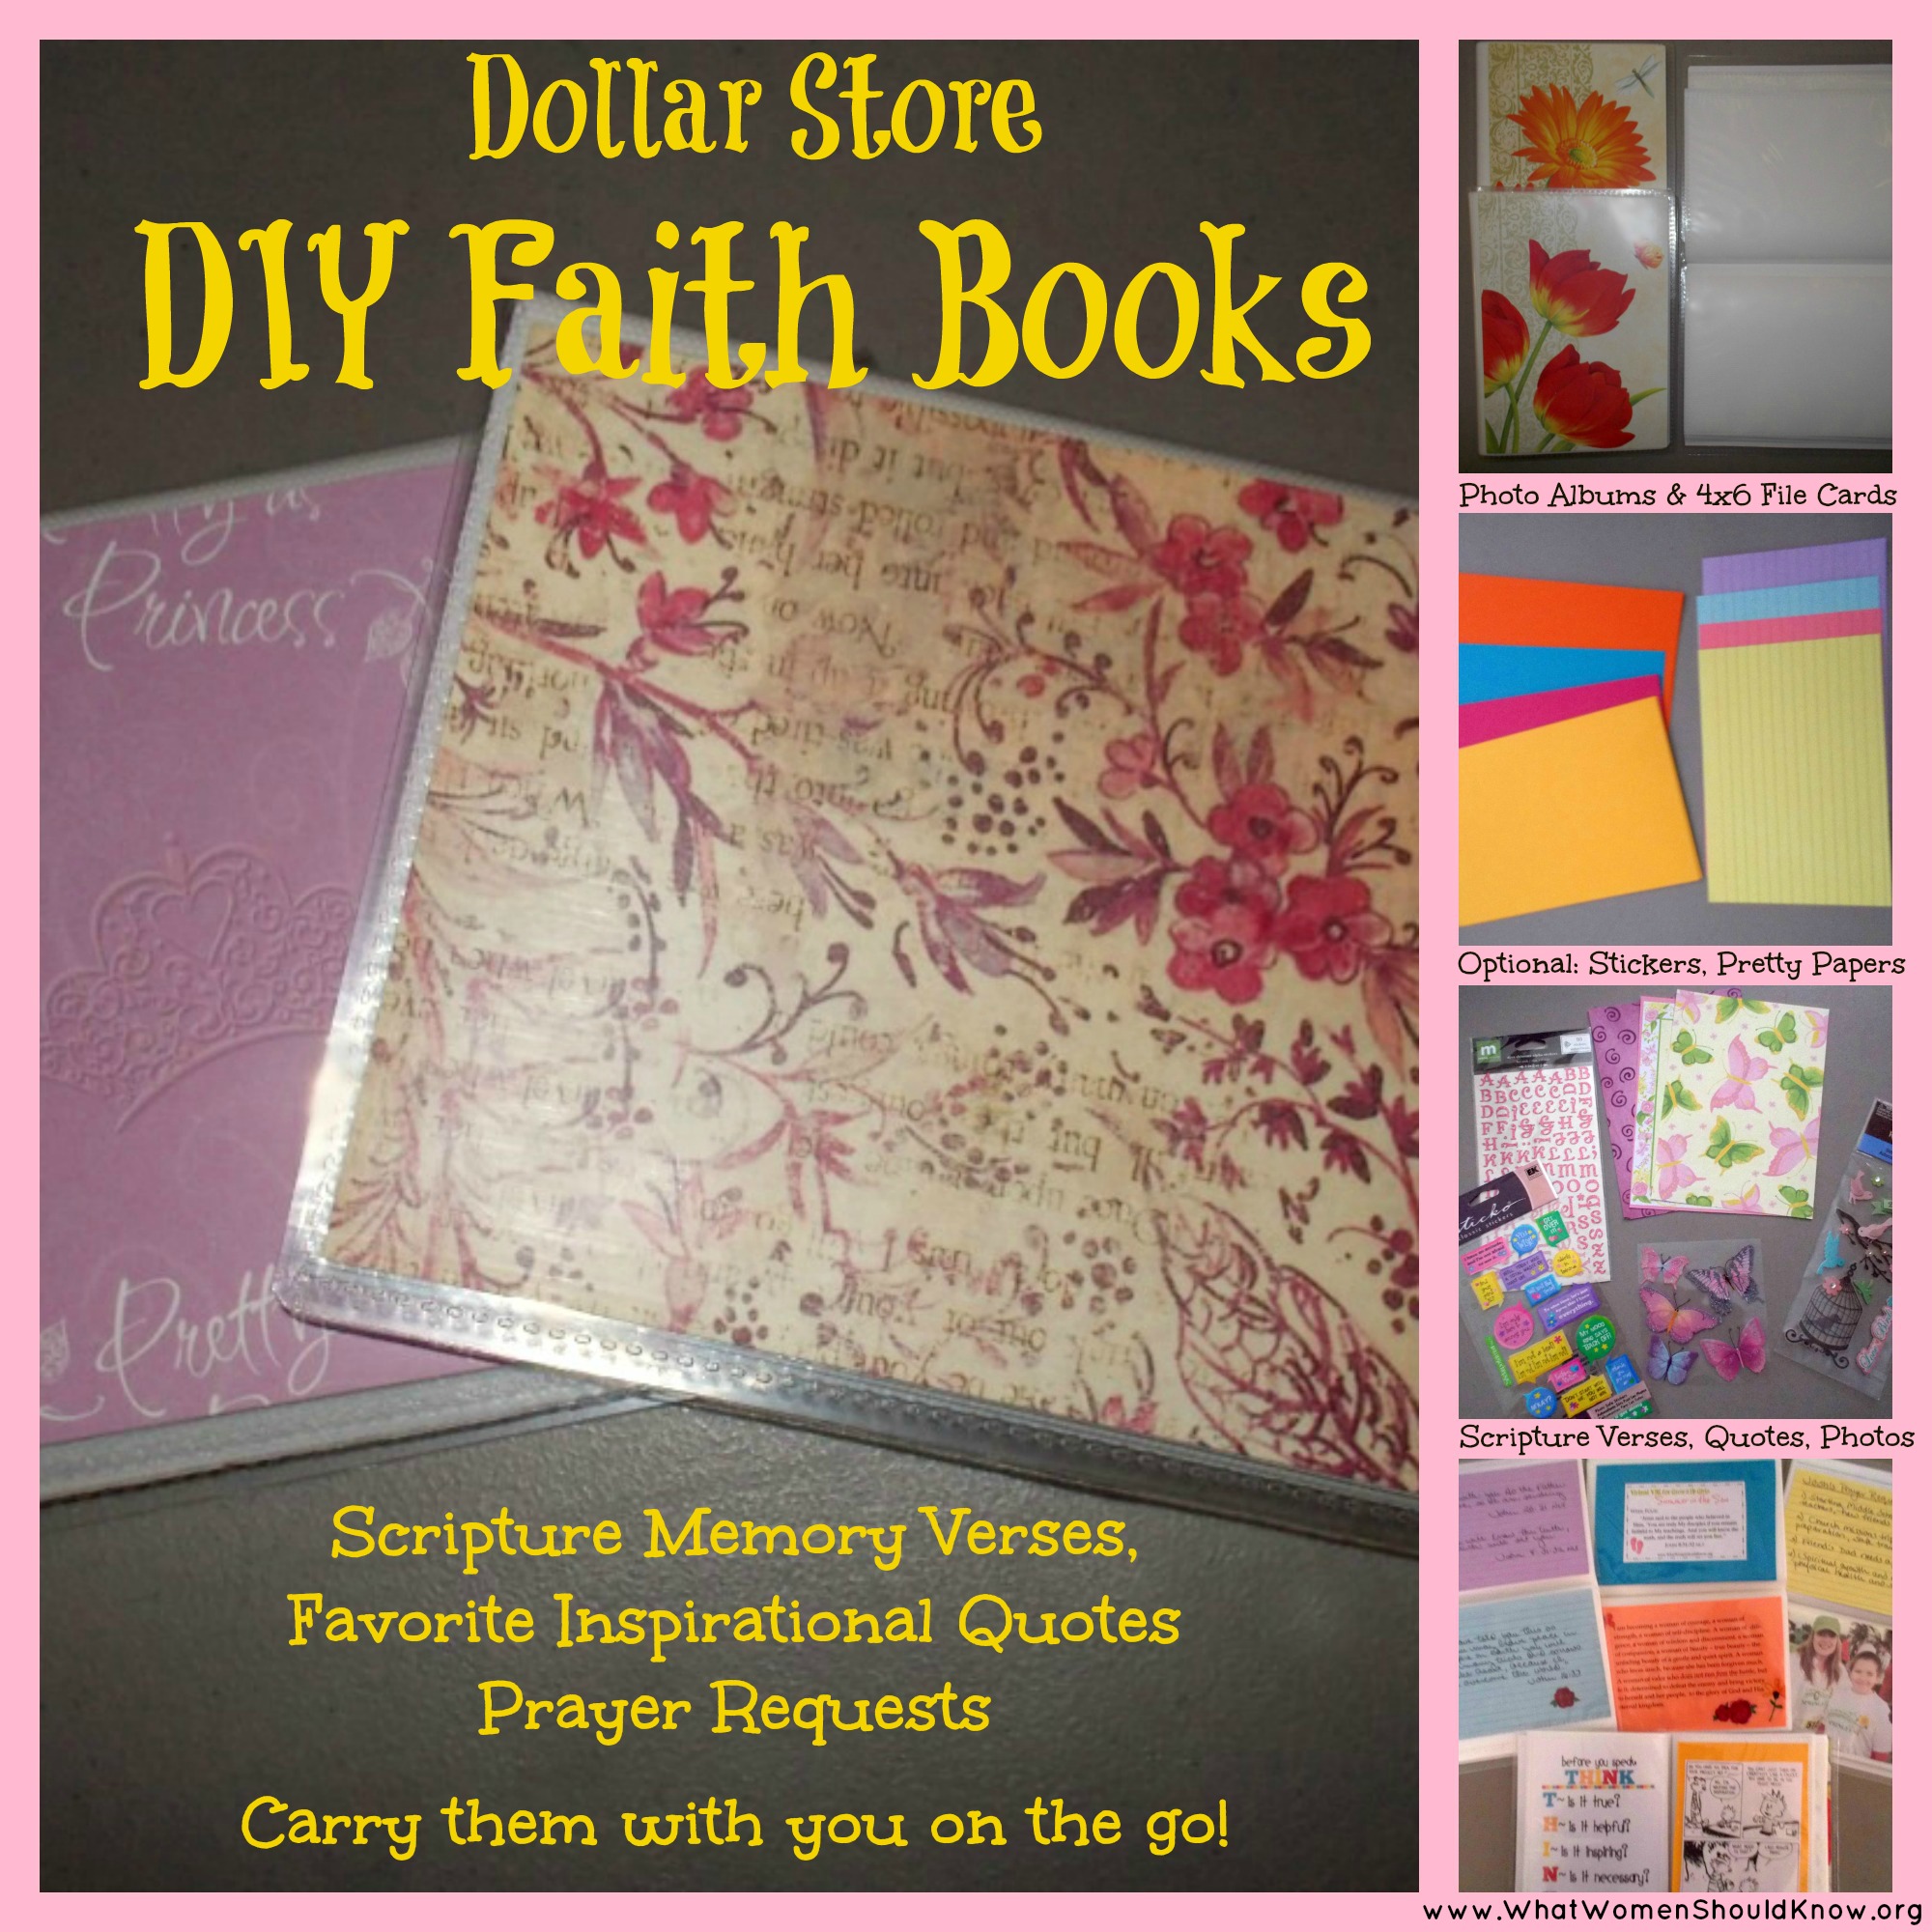 Dollar Store DIY Faith Books: Collect your favorite Scriptures and inspirational quotes in a little album you can carry with you and flip through anywhere you go!